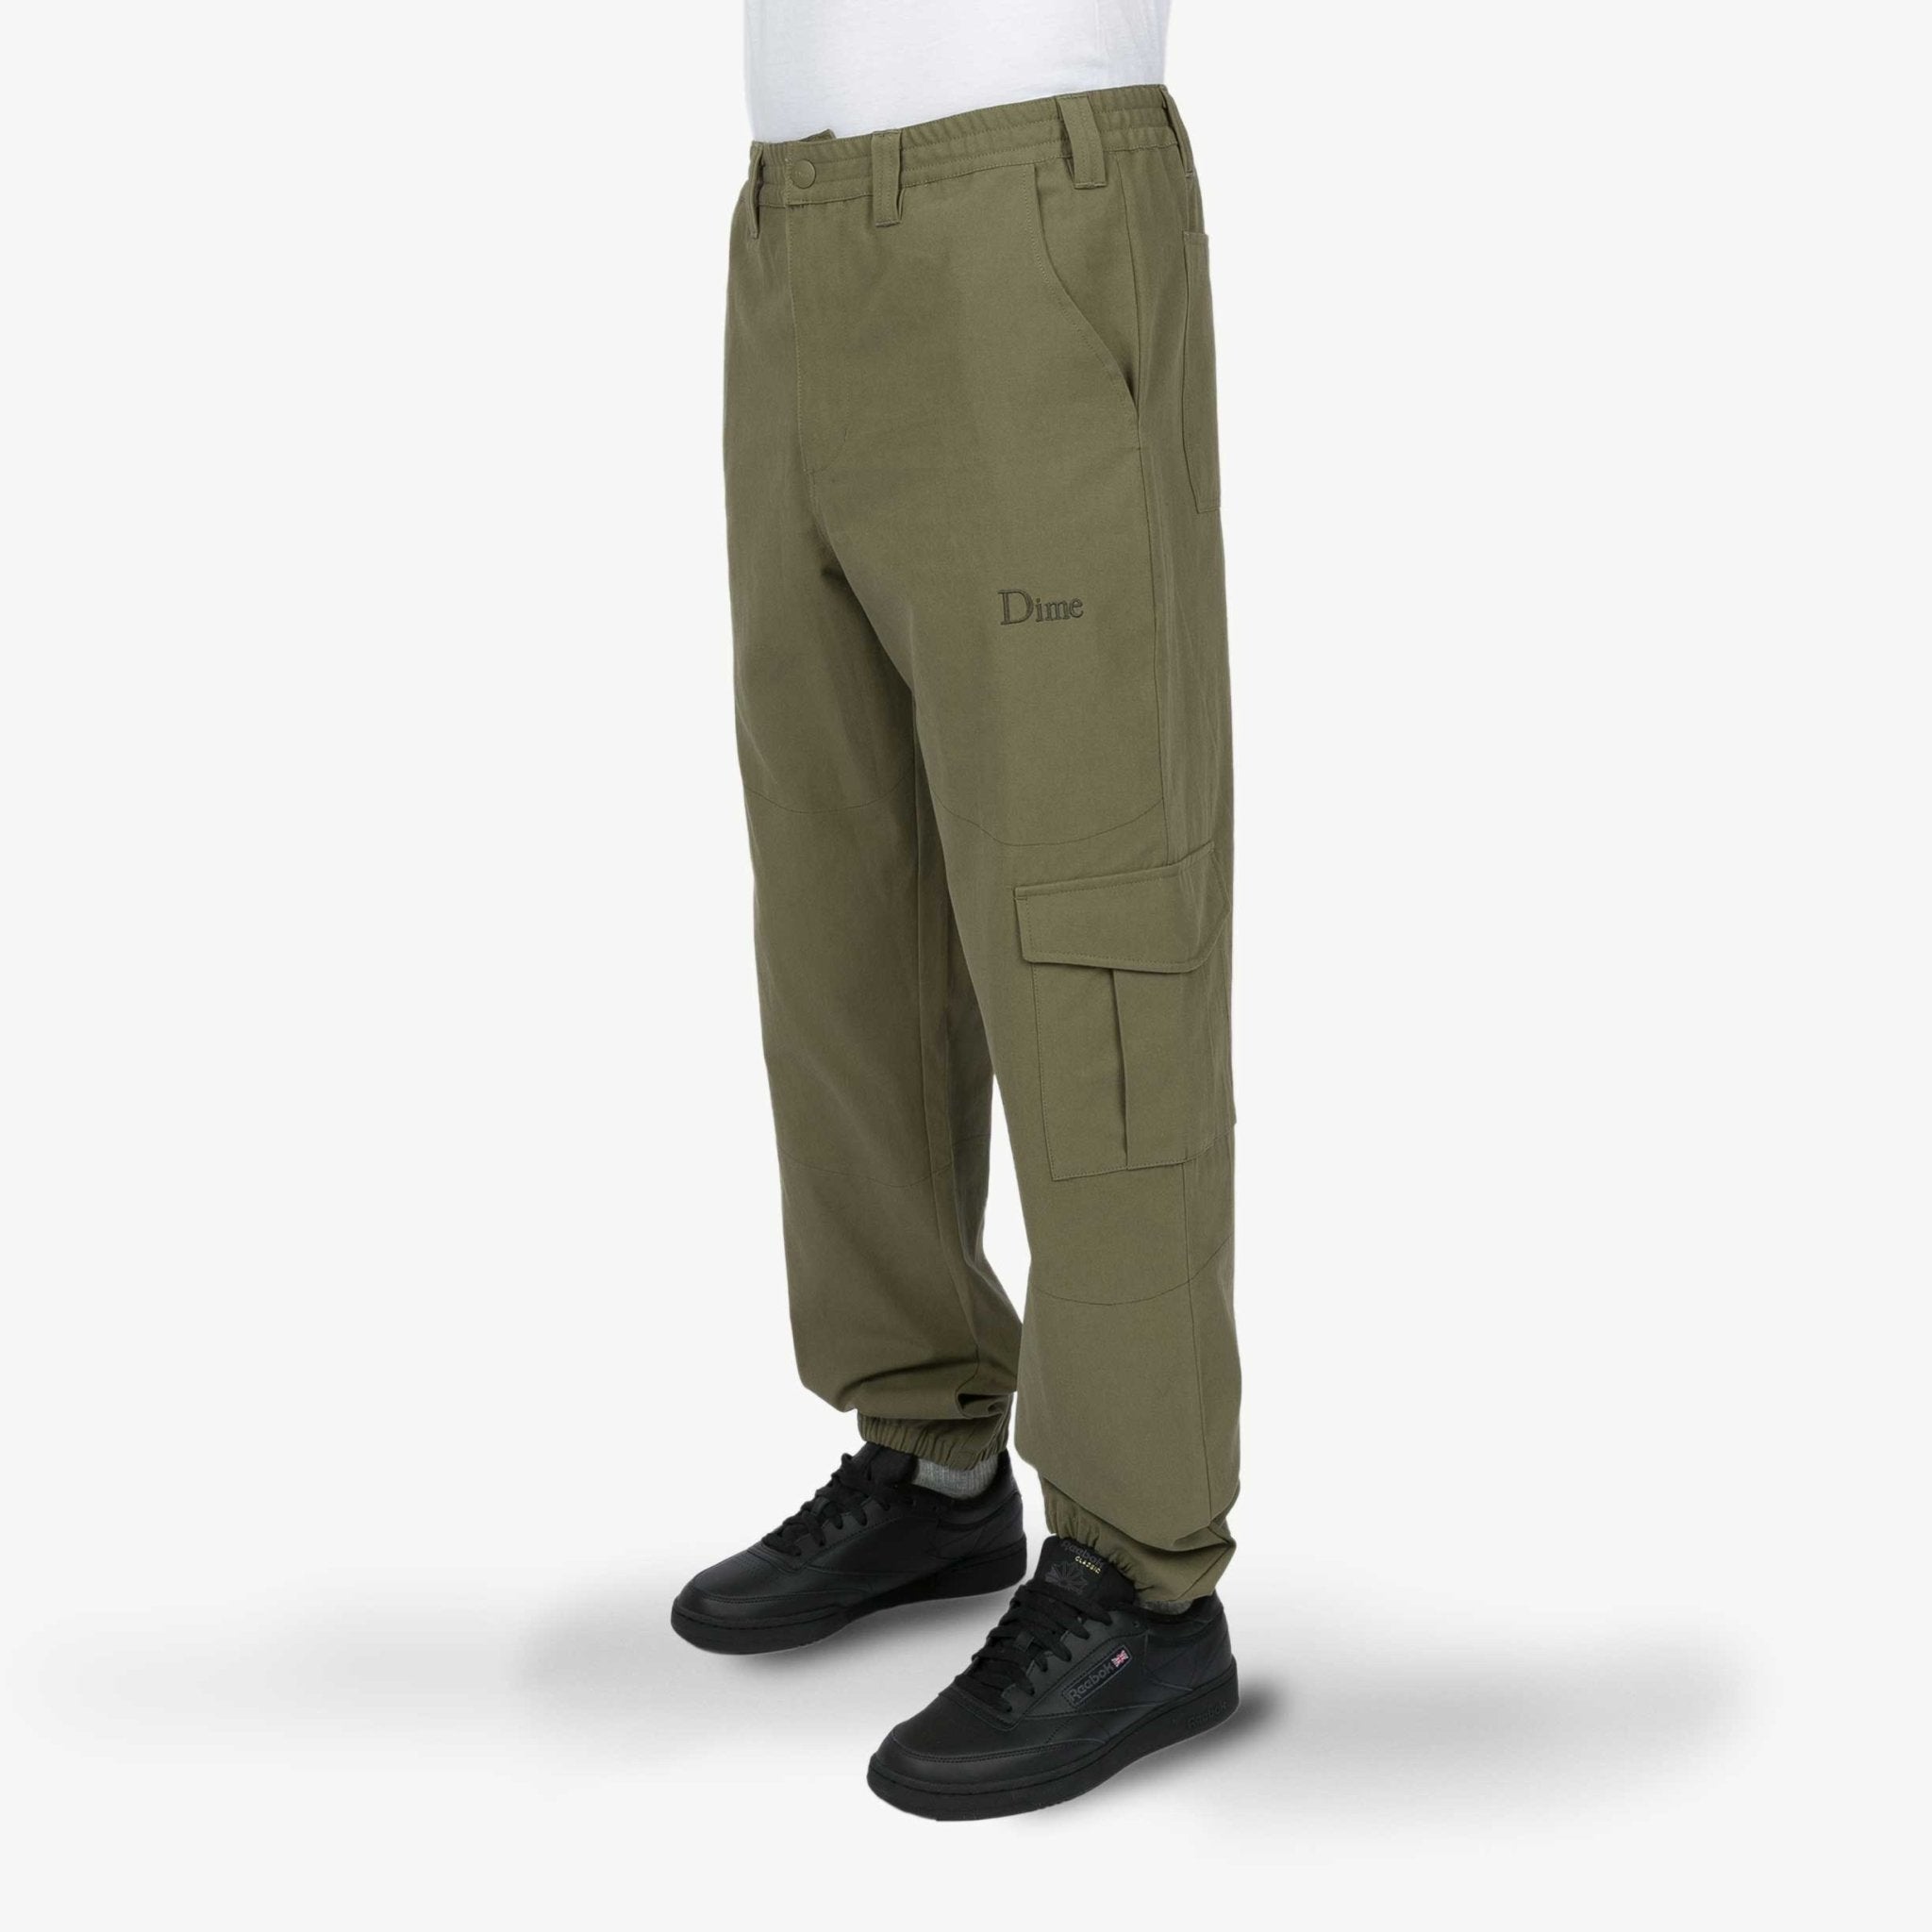 Dime Military I Know Pants, army green